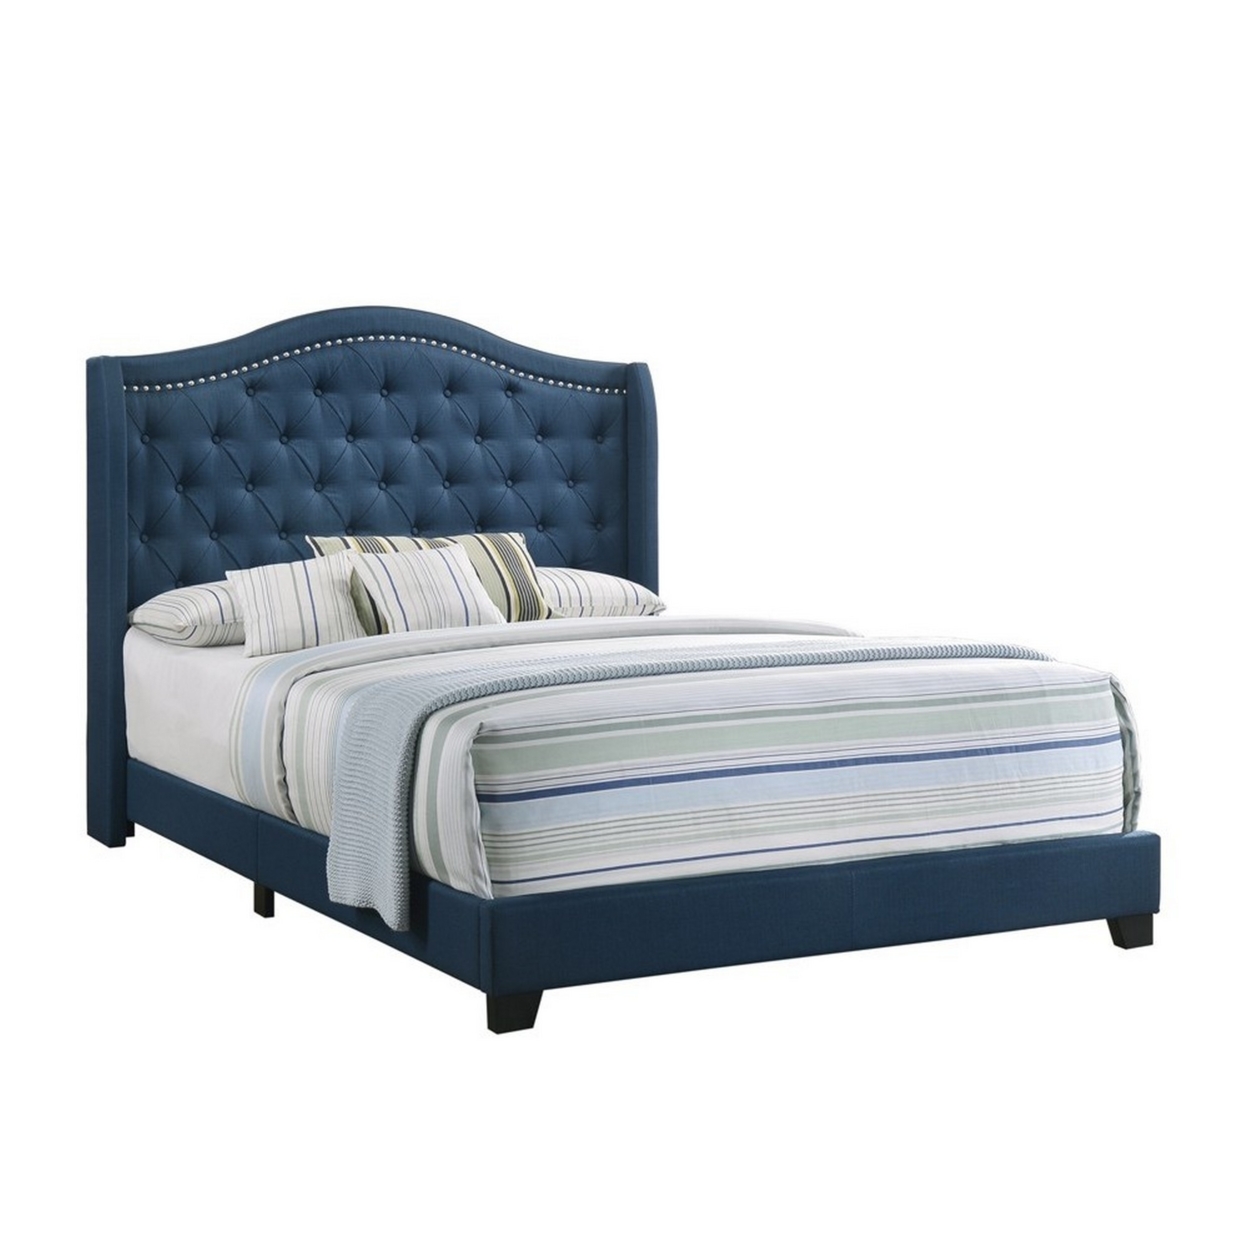 Fabric Upholstered Wooden Demi Wing Queen Bed With Camelback Headboard,Blue- Saltoro Sherpi